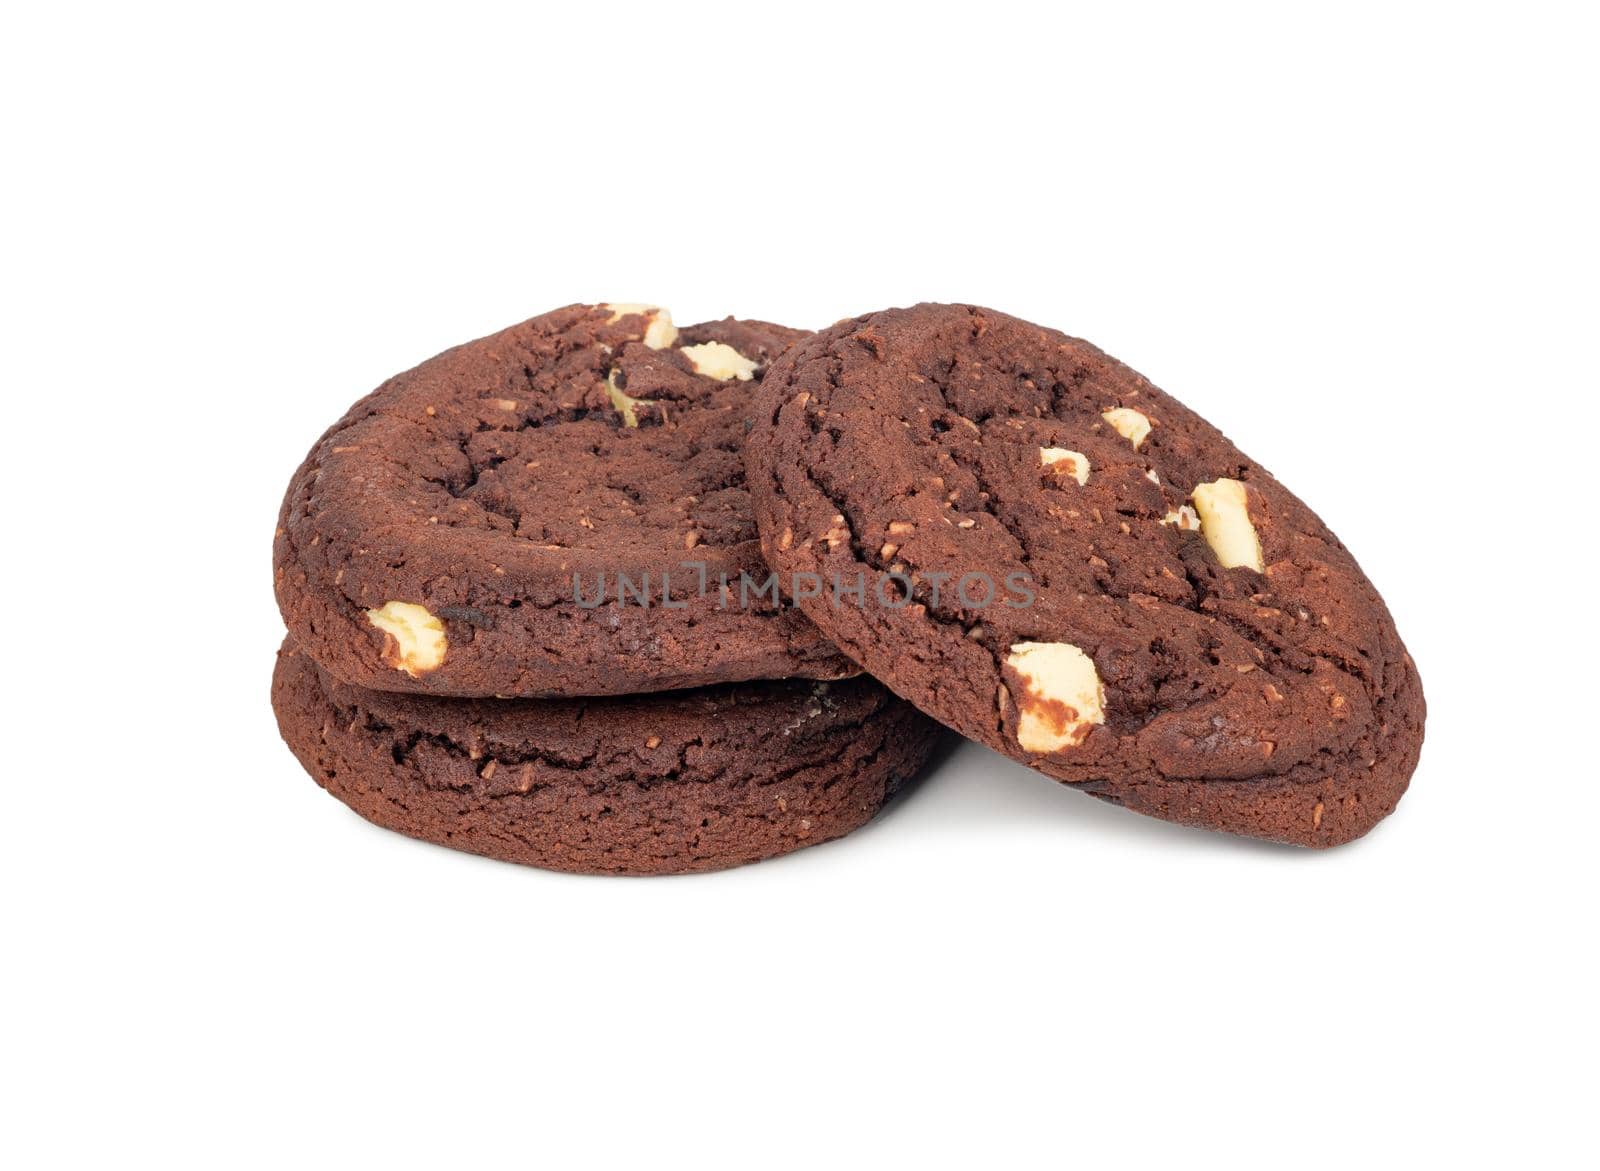 Three chocolate cookies with coconut slices on a white background